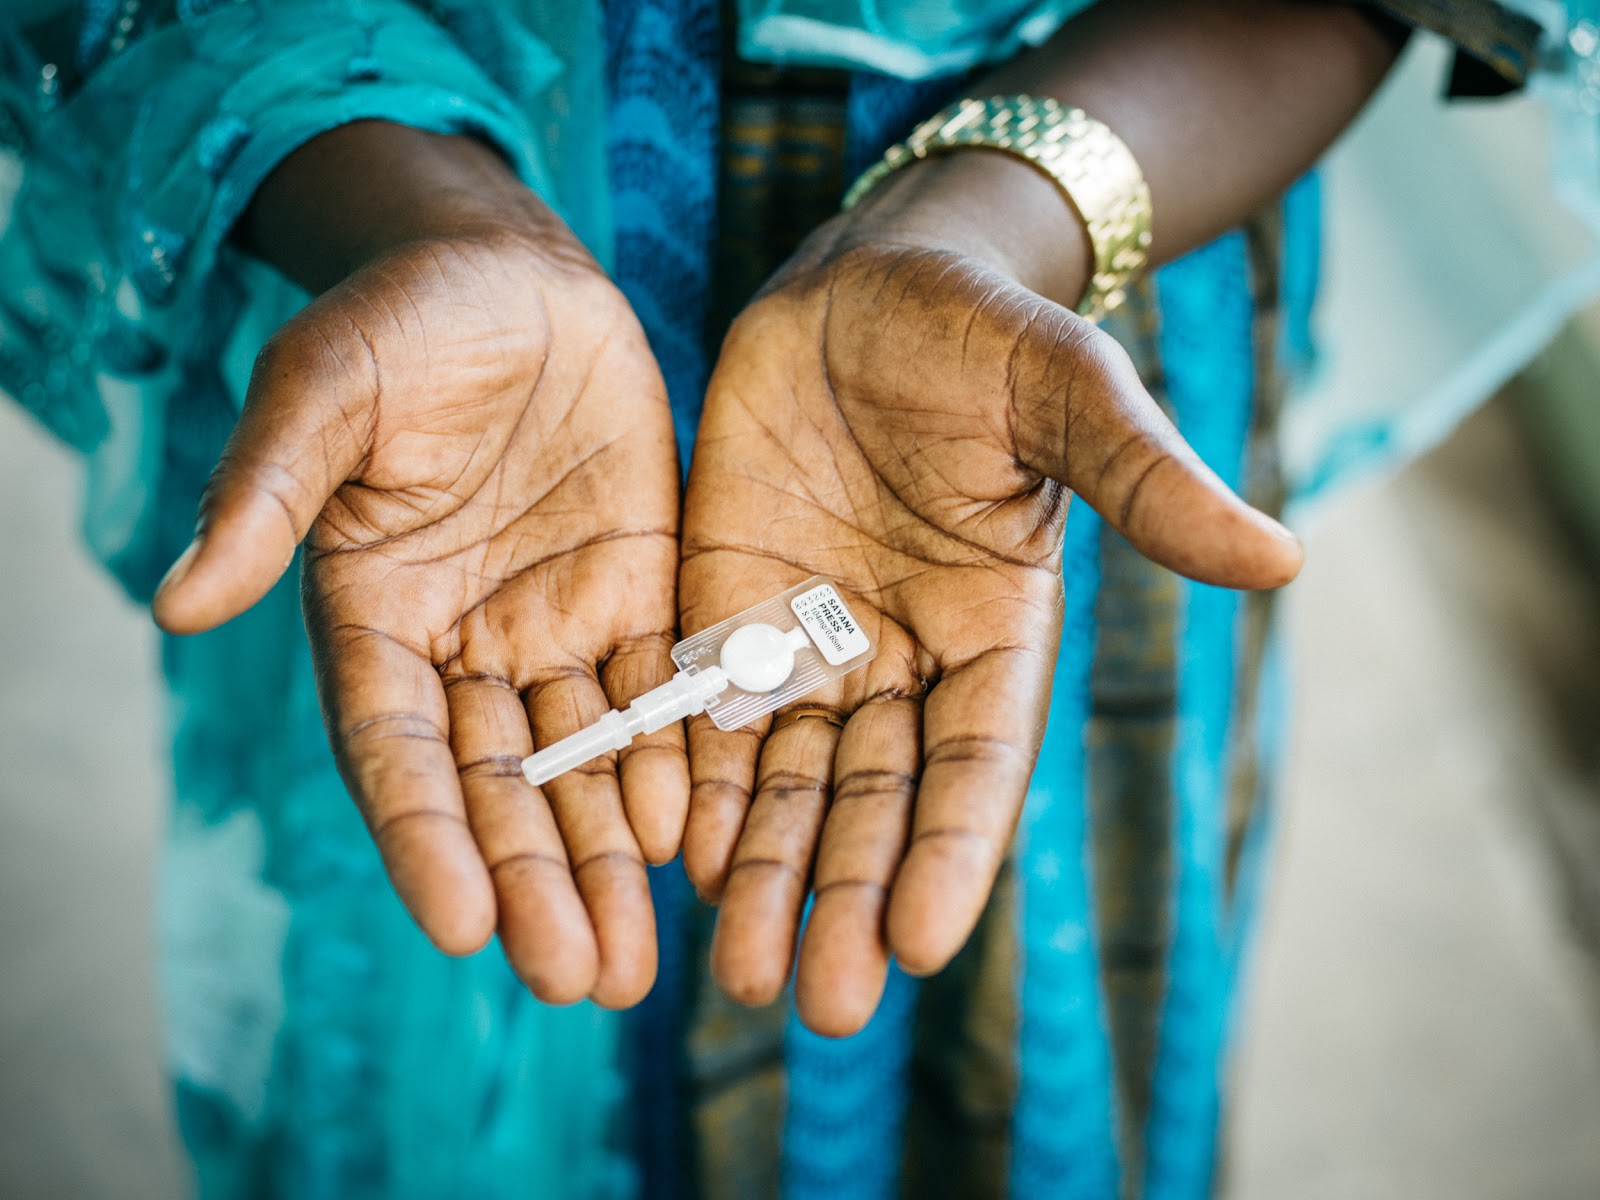 A woman in Senegal holds subcutaneous DMPA (DMPA-SC or brand name Sayana® Press) in both hands. Subcutaneous DMPA is a lower-dose, all-in-one injectable contraceptive that is administered every three months under the skin into the fat rather than into the muscle.